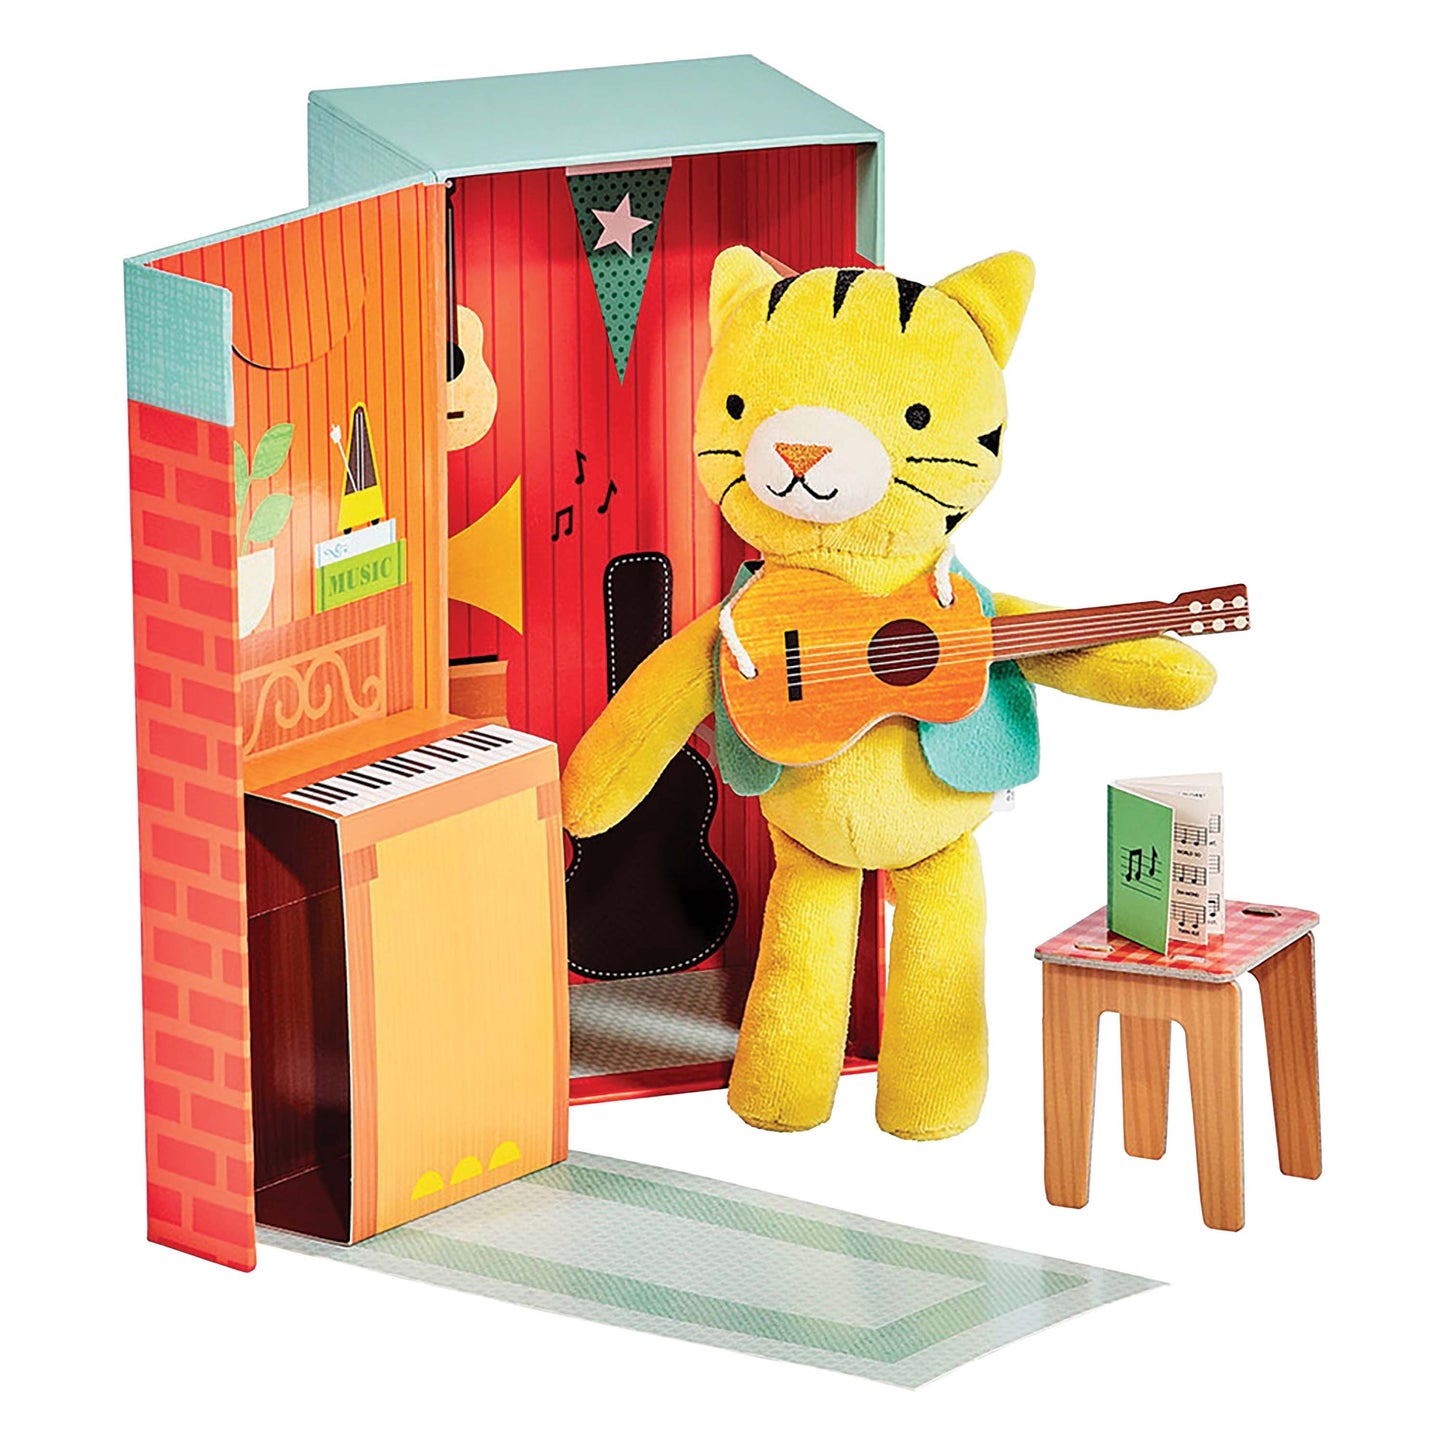 Petit Collage - Theodore the Tiger Playset